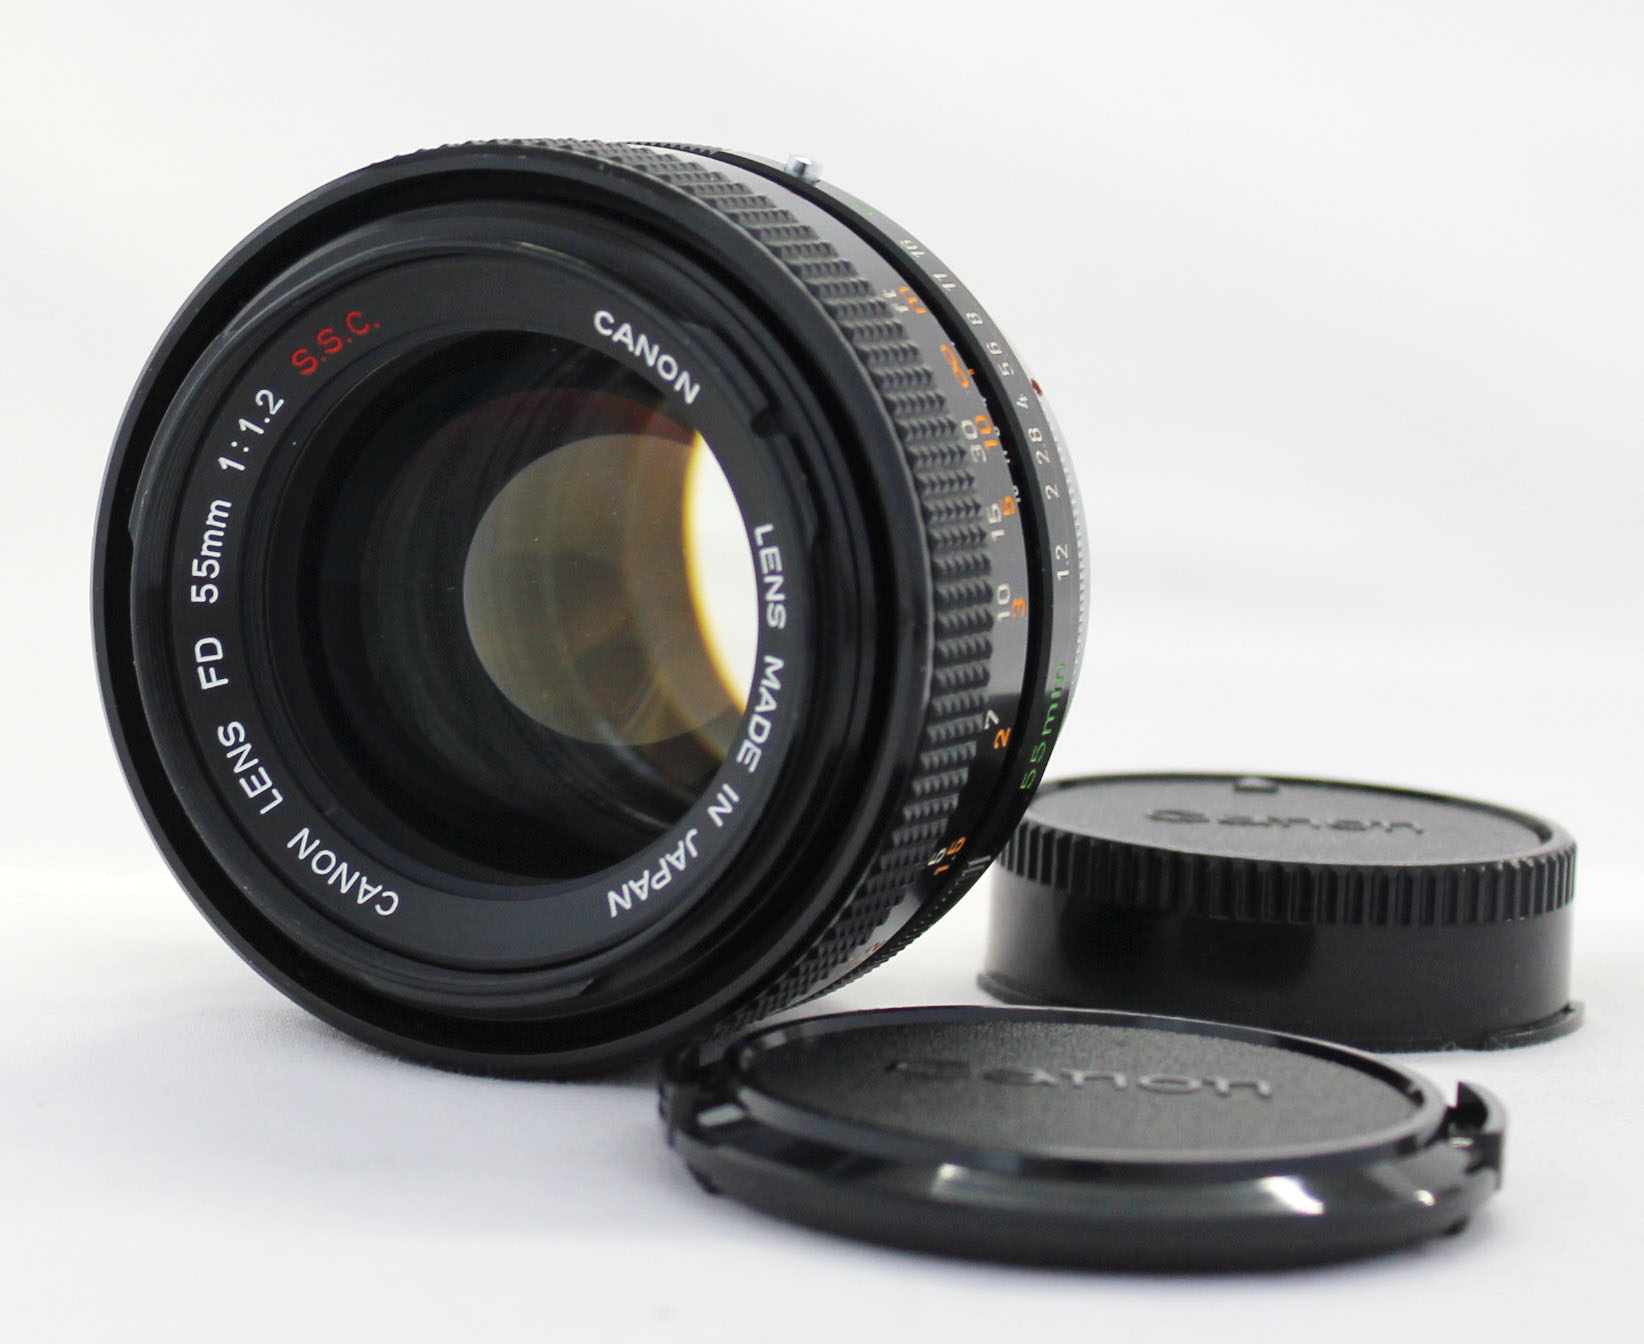  Canon FD 55mm F/1.2 S.S.C. ssc MF Standard Prime Lens from Japan Photo 0